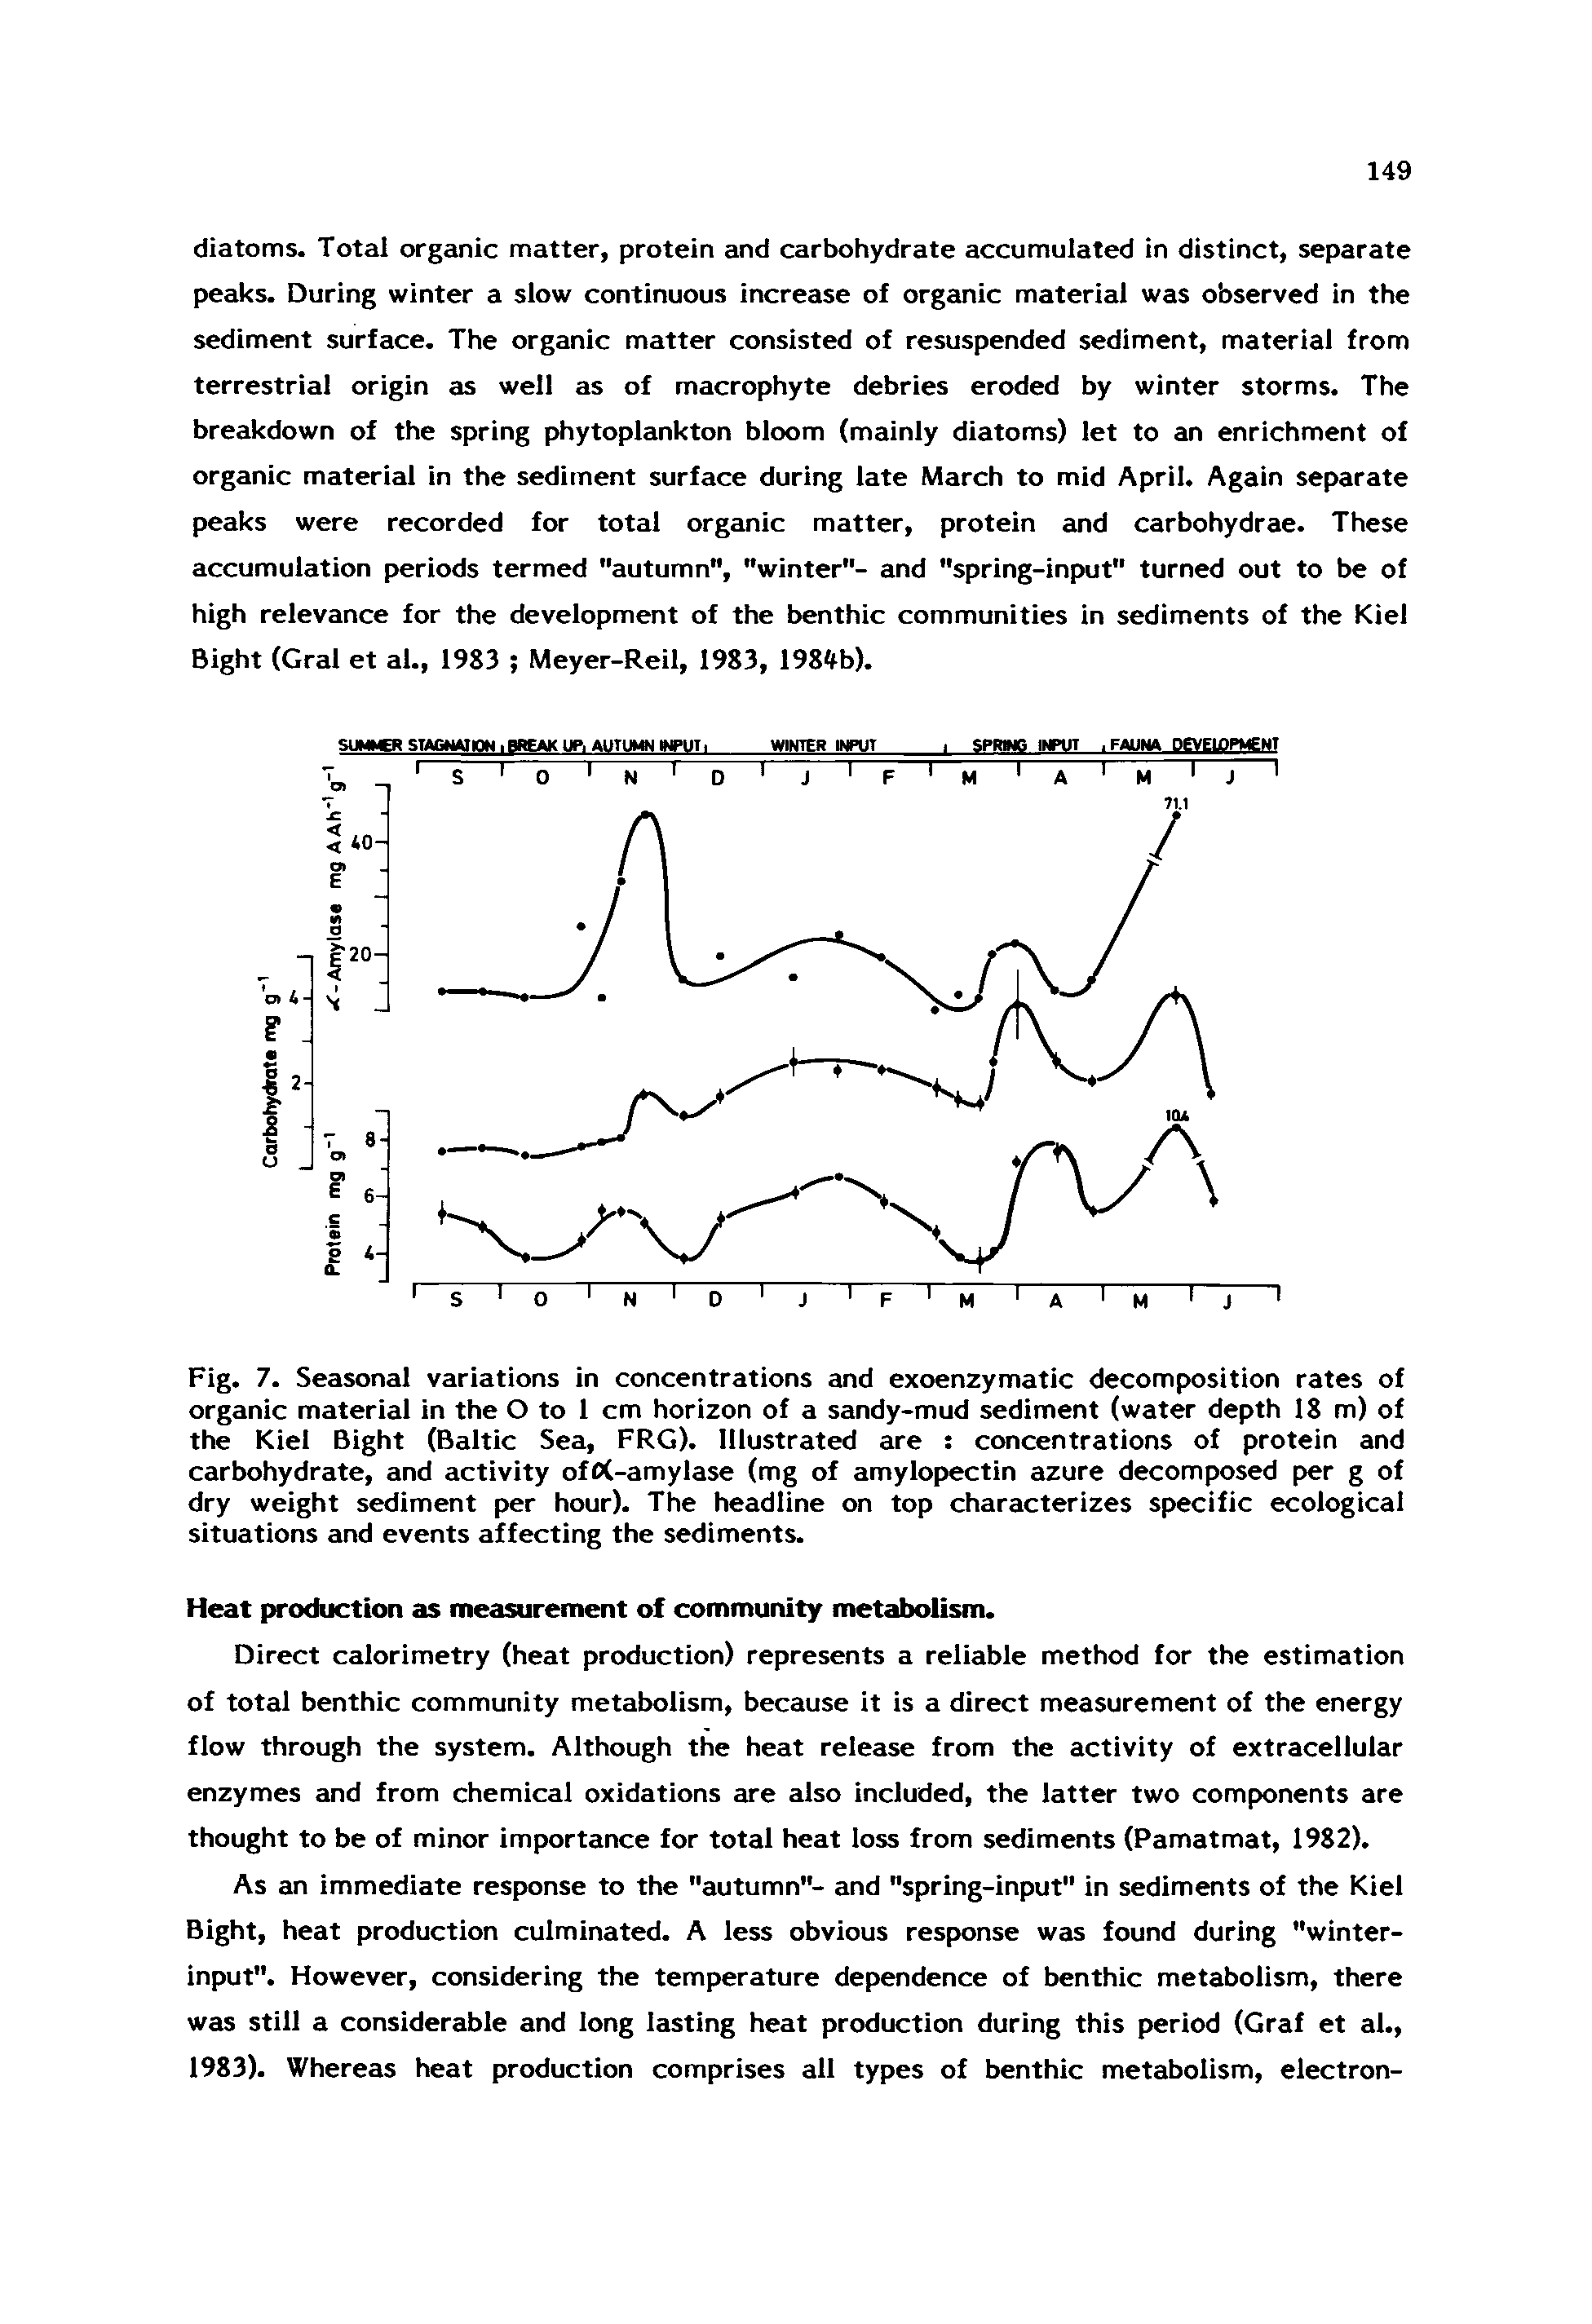 Fig. 7. Seasonal variations in concentrations and exoenzymatic decomposition rates of organic material in the O to 1 cm horizon of a sandy-mud sediment (water depth 18 m) of the Kiel Bight (Baltic Sea, FRG). Illustrated are concentrations of protein and carbohydrate, and activity ofO(-amylase (mg of amylopectin azure decomposed per g of dry weight sediment per hour). The headline on top characterizes specific ecological situations and events affecting the sediments.